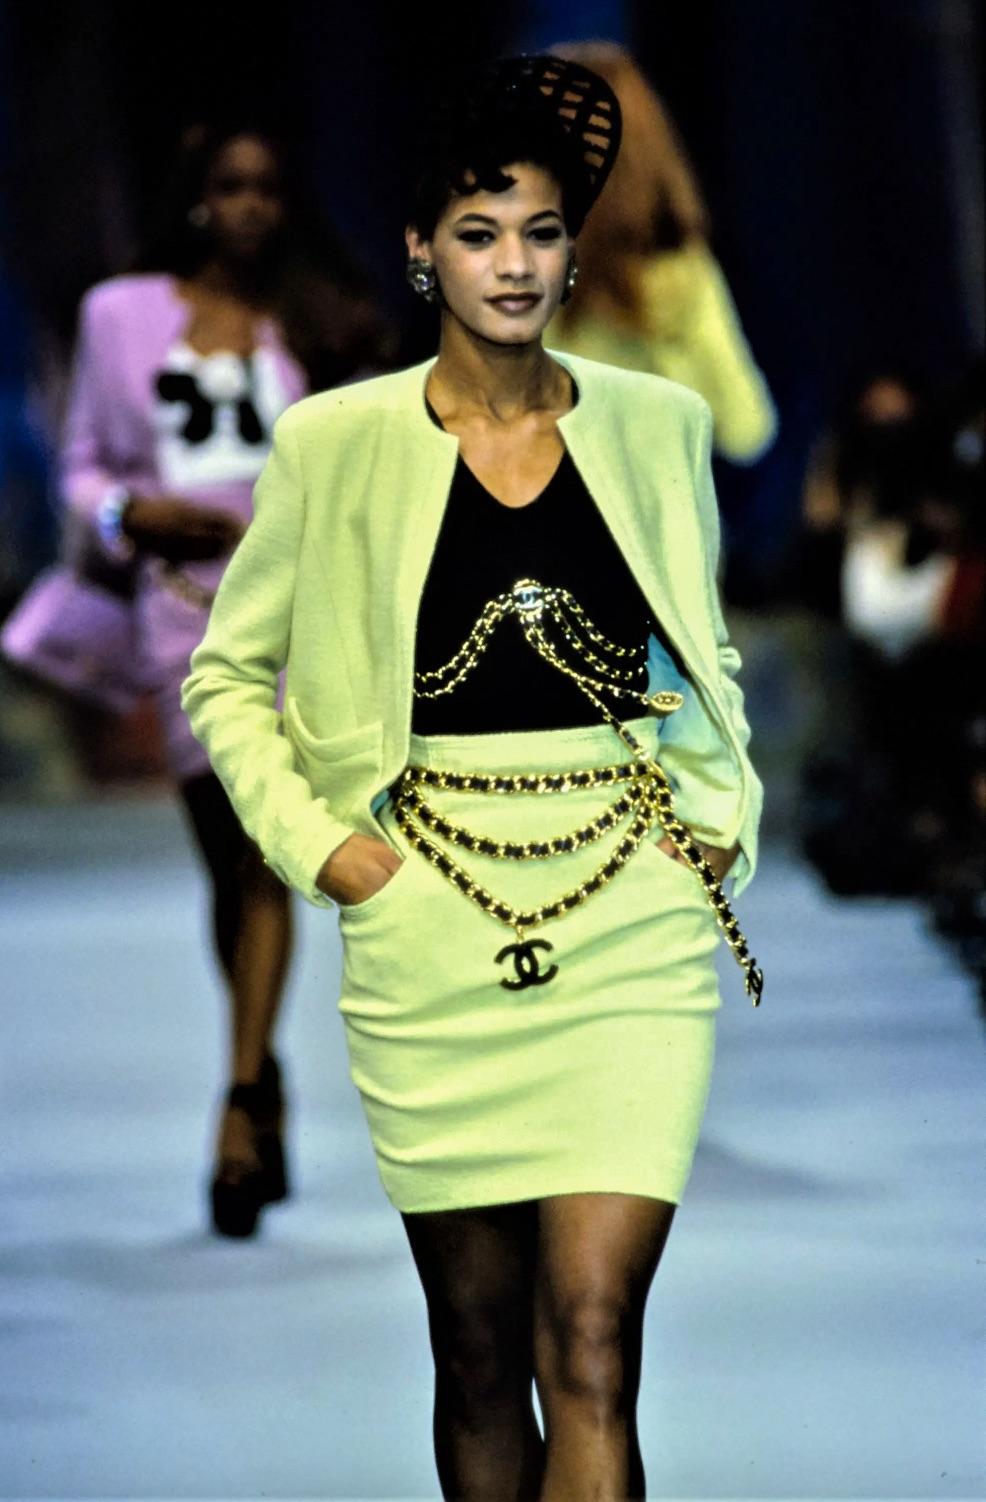 Introducing a rare gem from Chanel's Spring/Summer 1992 collection: an exquisite apple green tweed suit. This ensemble consists of an open-front jacket and a high-waisted knee-length pencil skirt designed to accentuate your figure with stylish